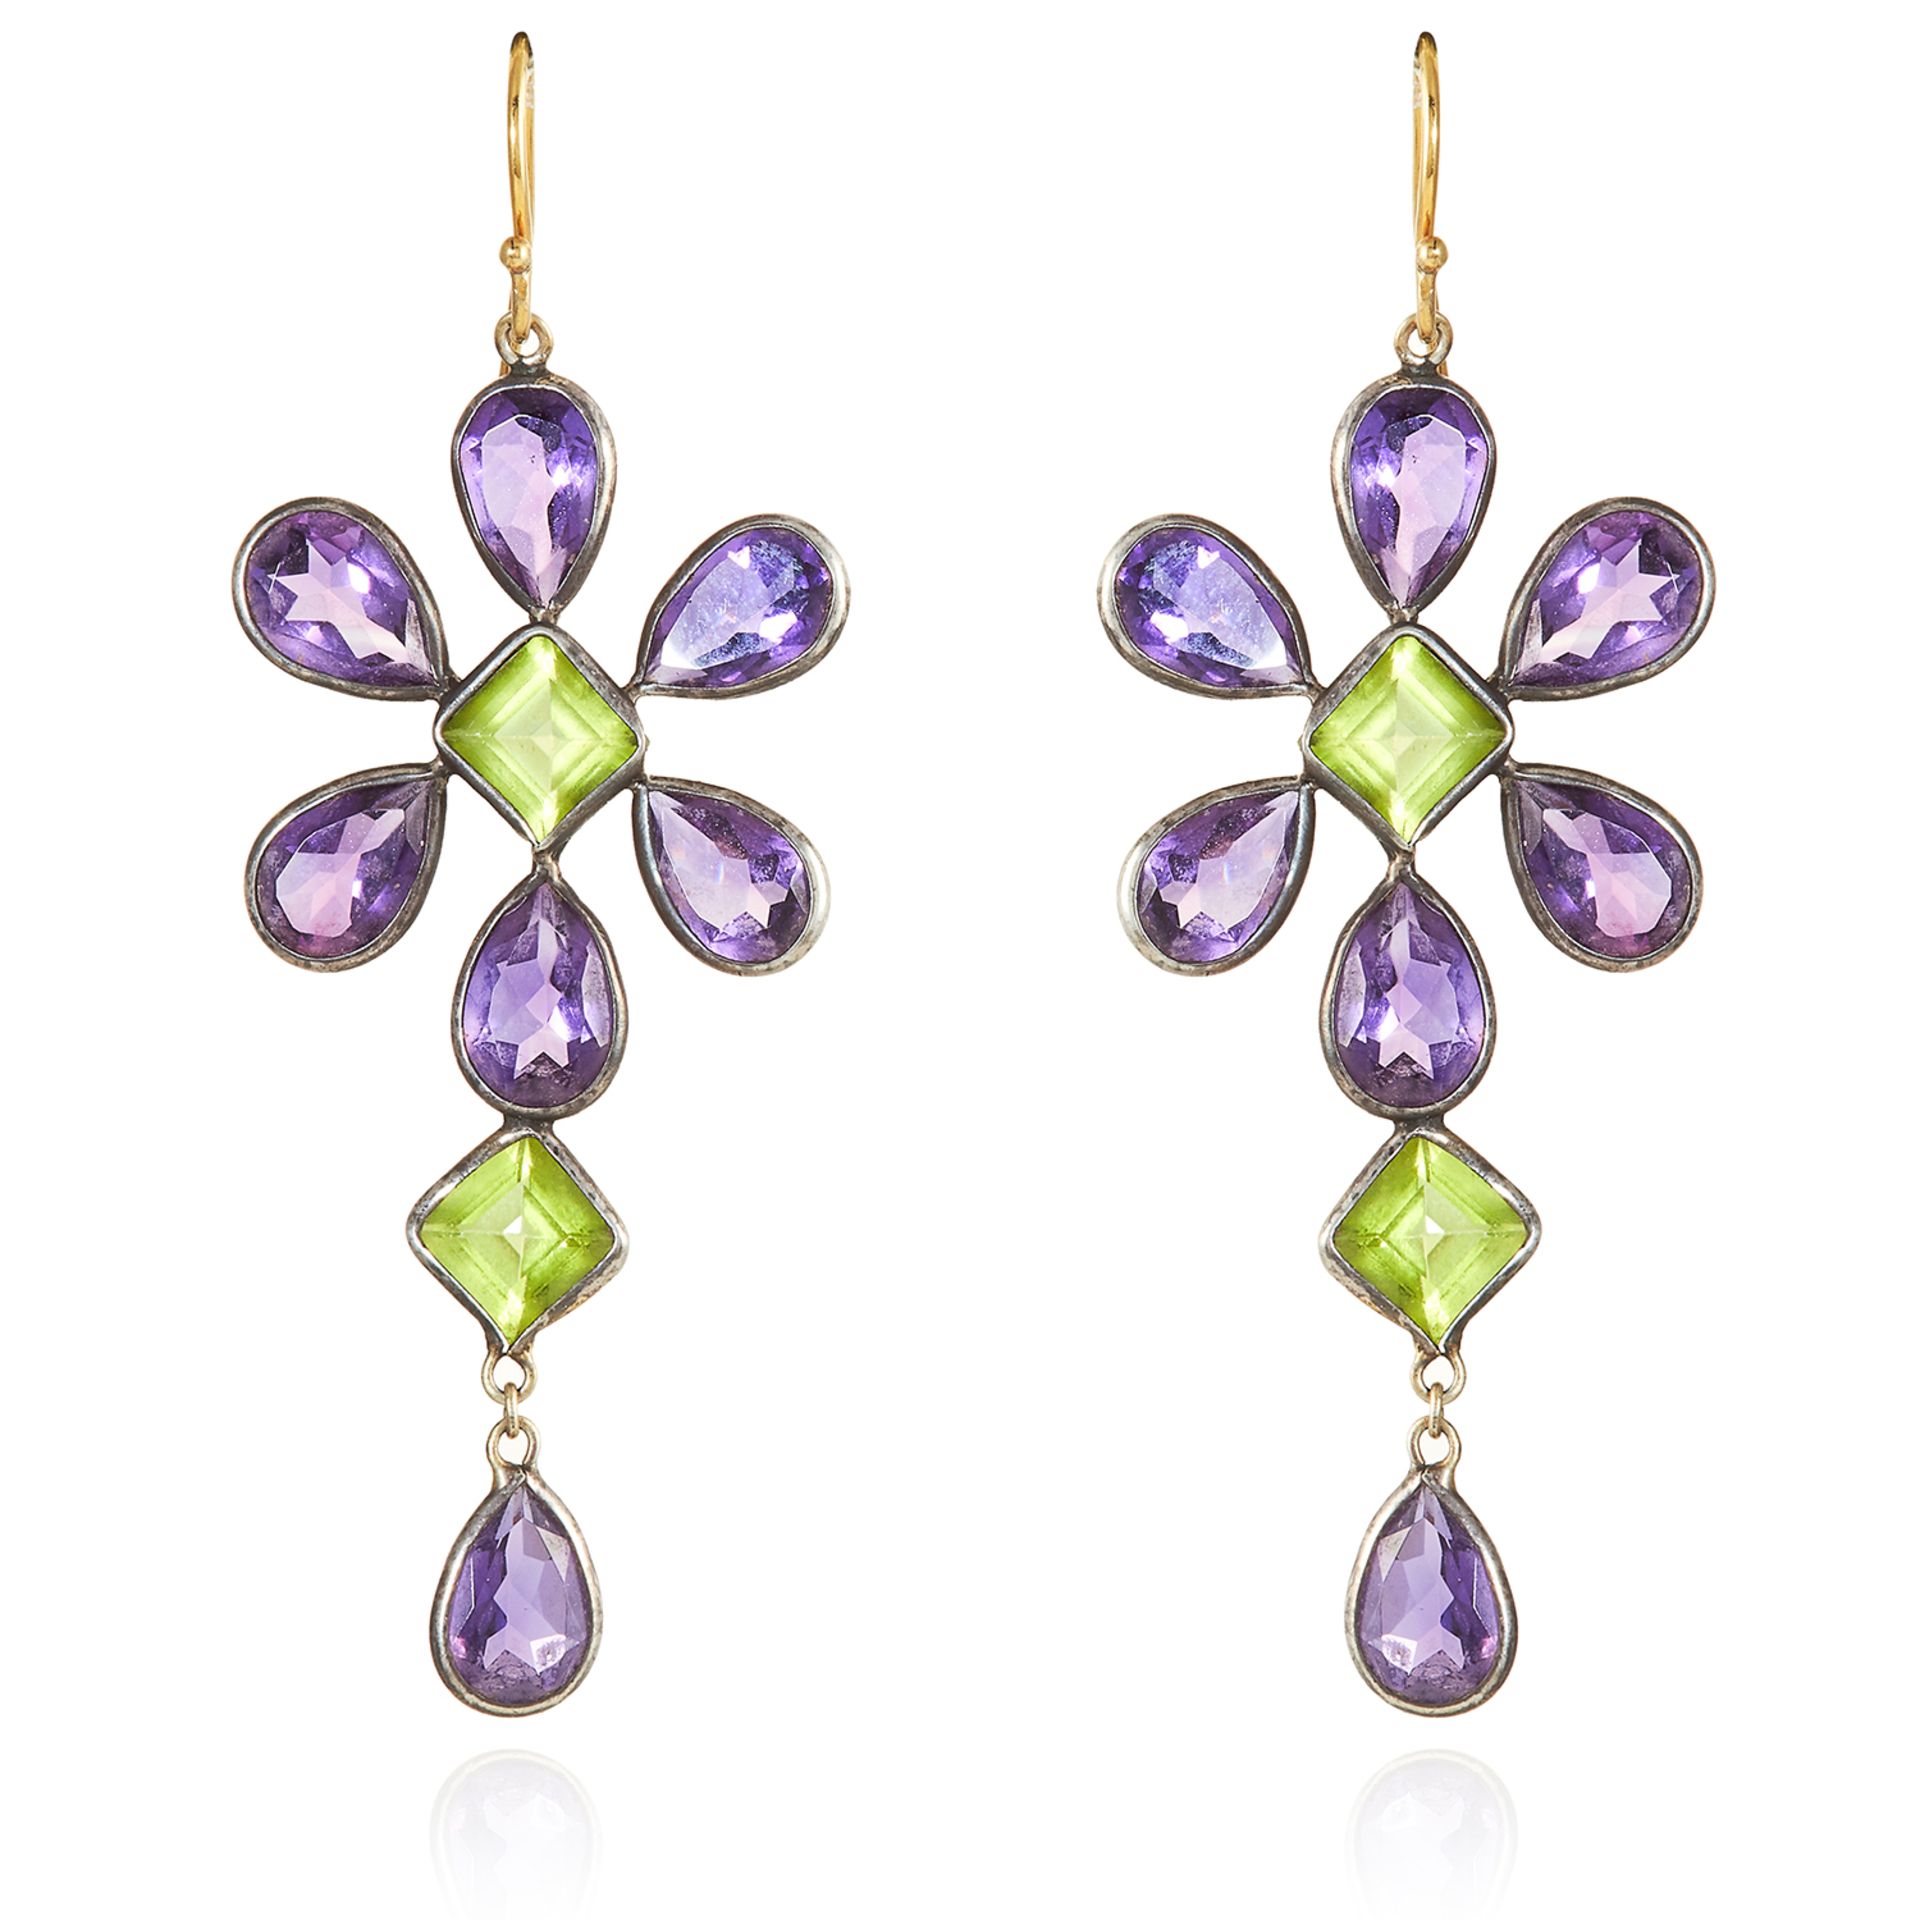 A PAIR OF AMETHYST AND PERIDOT EARRINGS in gold and silver, designed as floral motifs, 6.5cm, 6.6g.